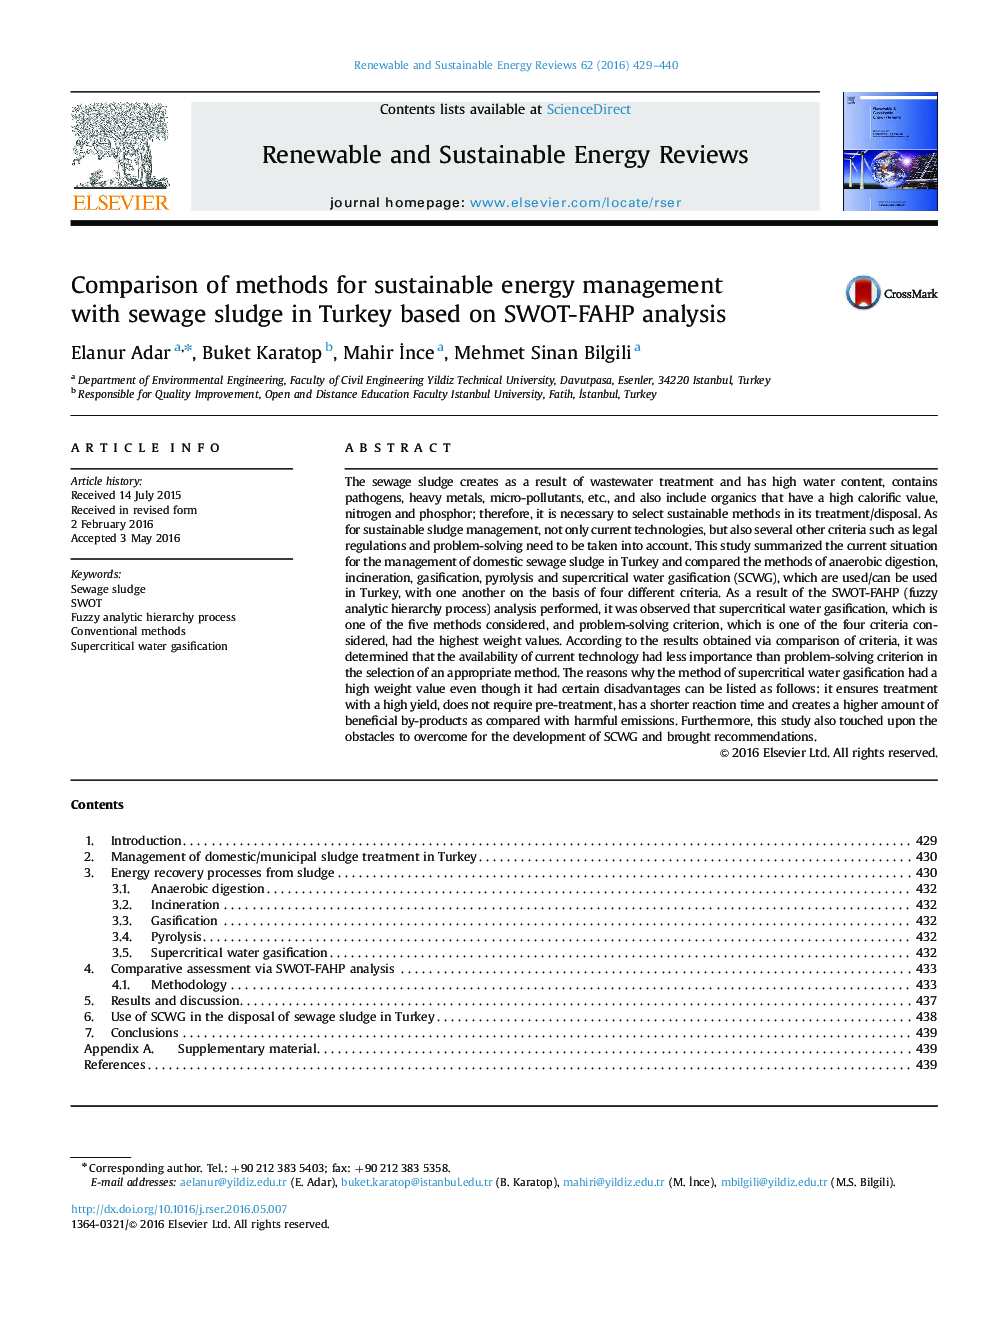 Comparison of methods for sustainable energy management with sewage sludge in Turkey based on SWOT-FAHP analysis